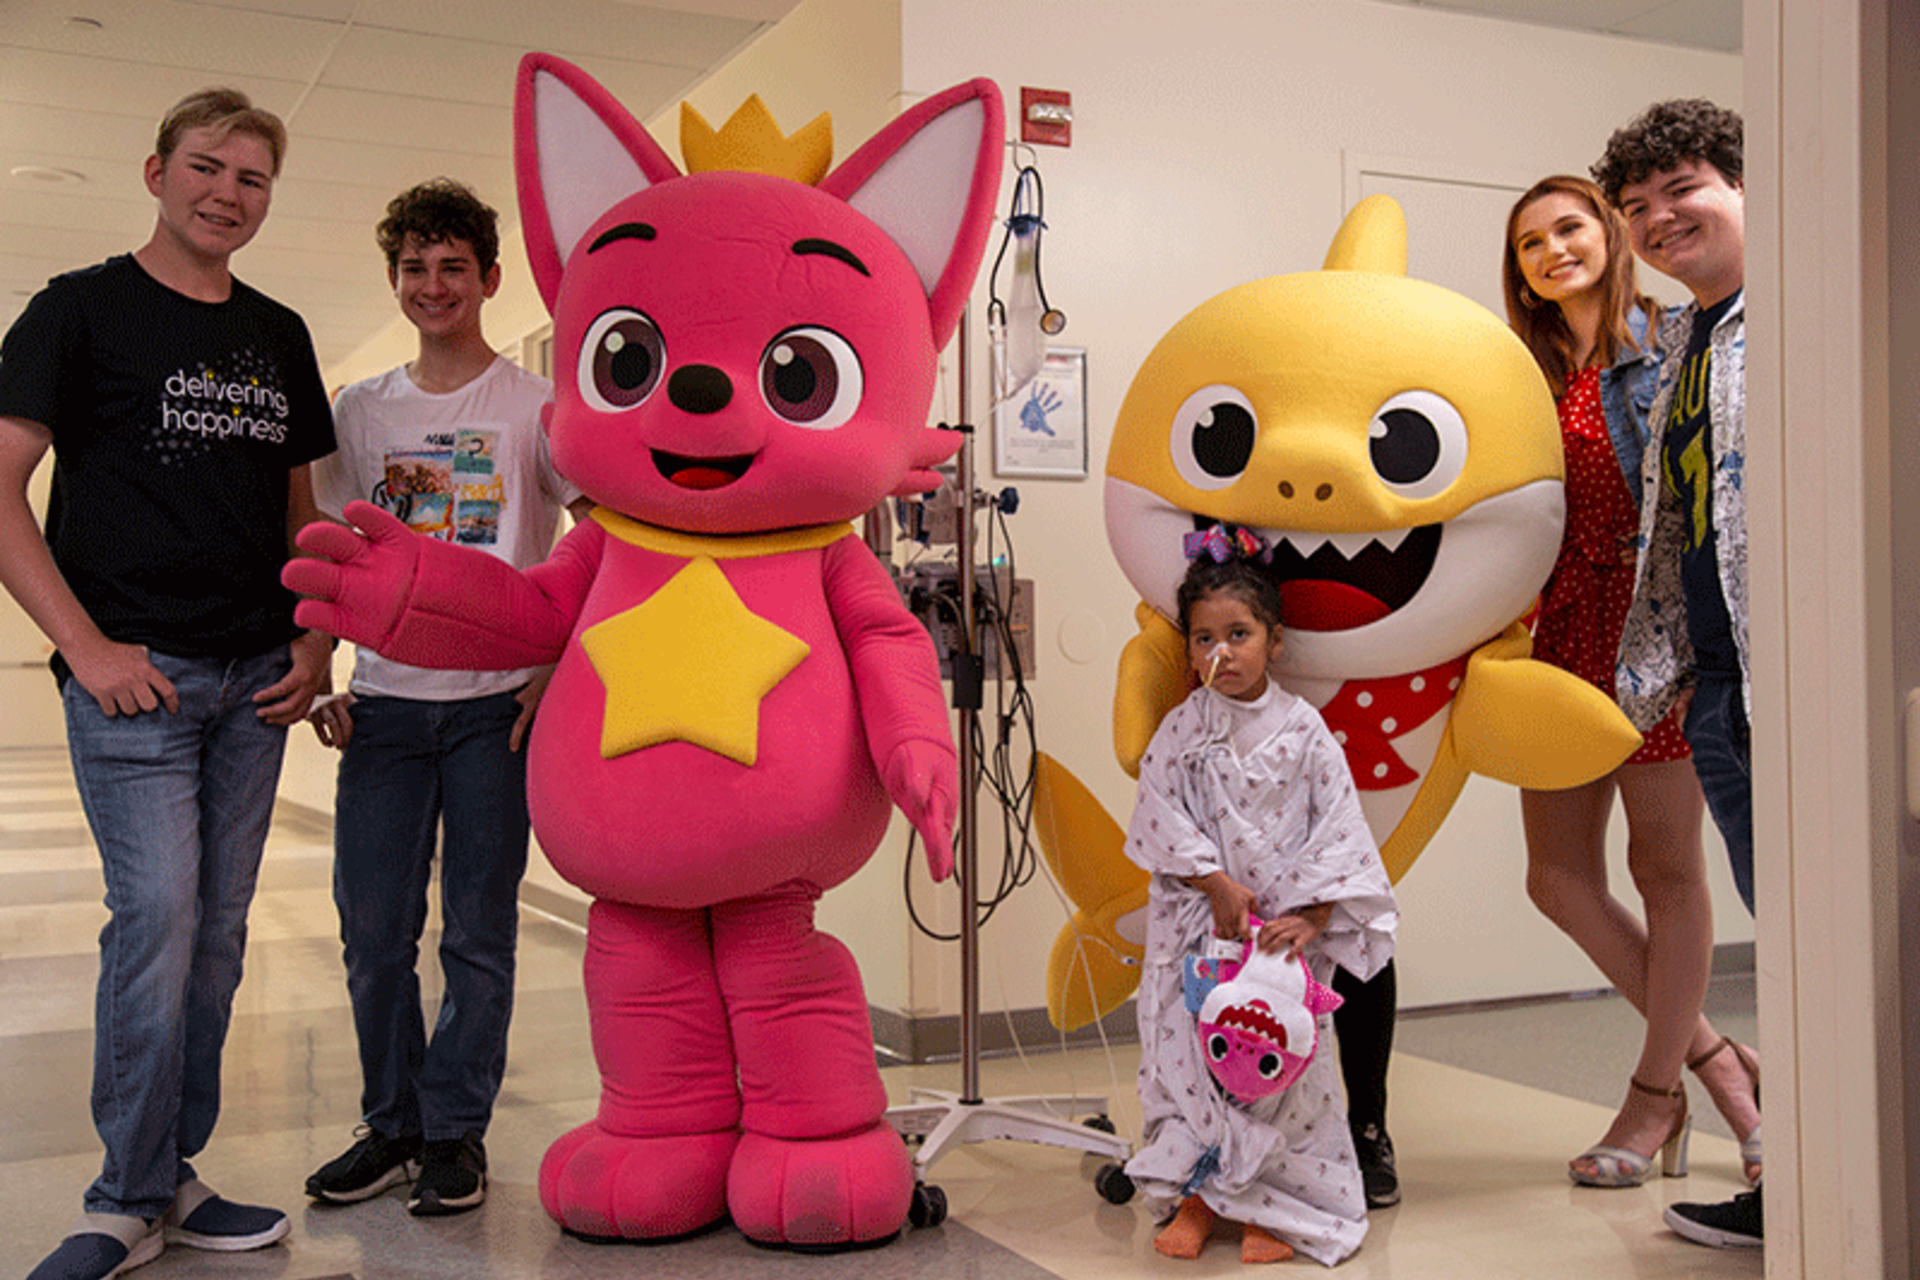 Kids in pediatric playroom posing with Baby Shark and Pinkfong 